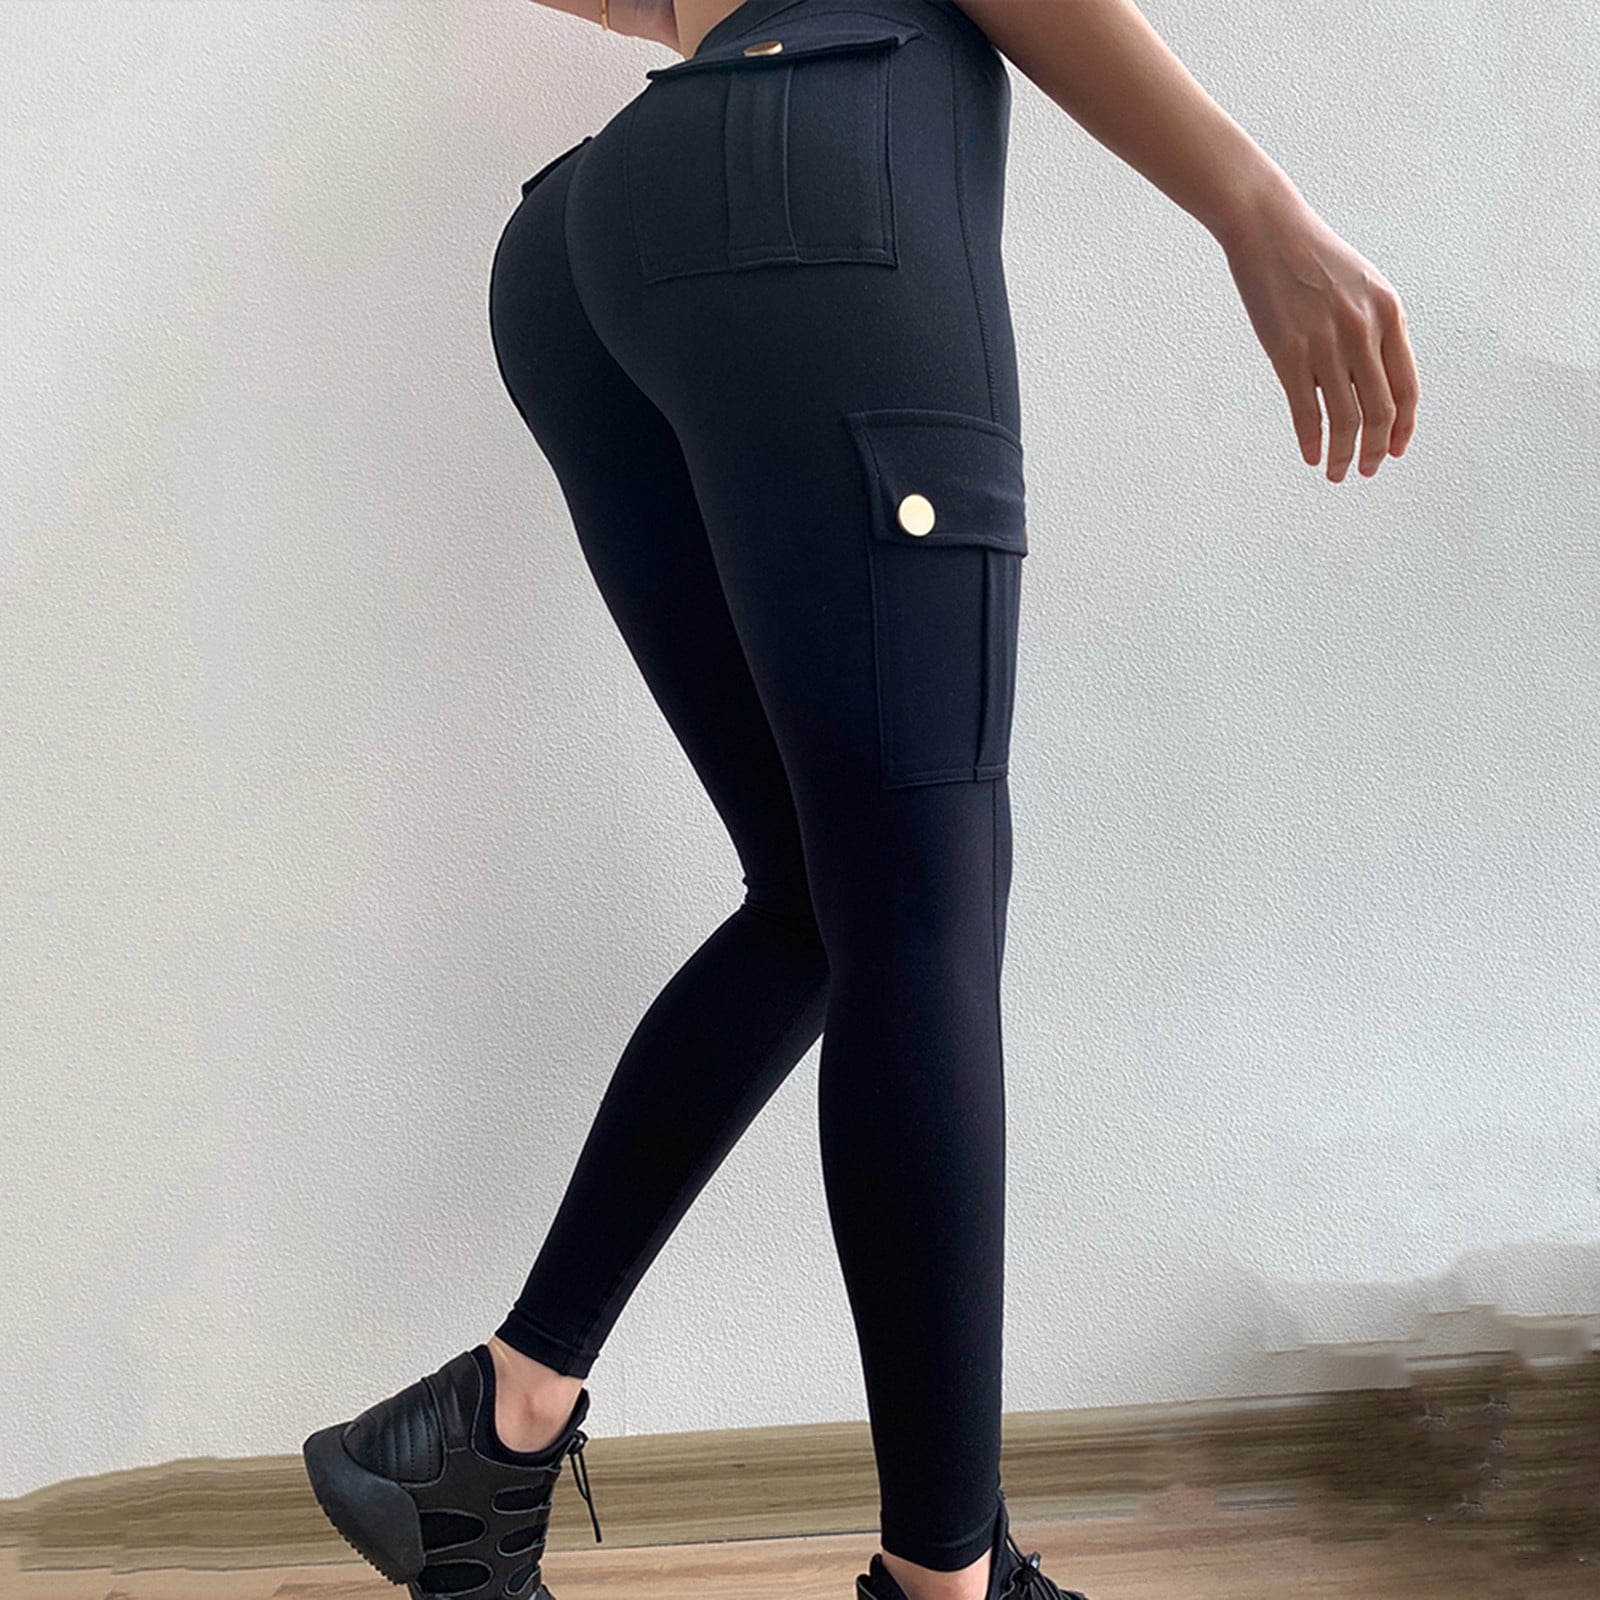 Kayannuo Yoga Pants with Pockets for Women Clearance Multi Pockets